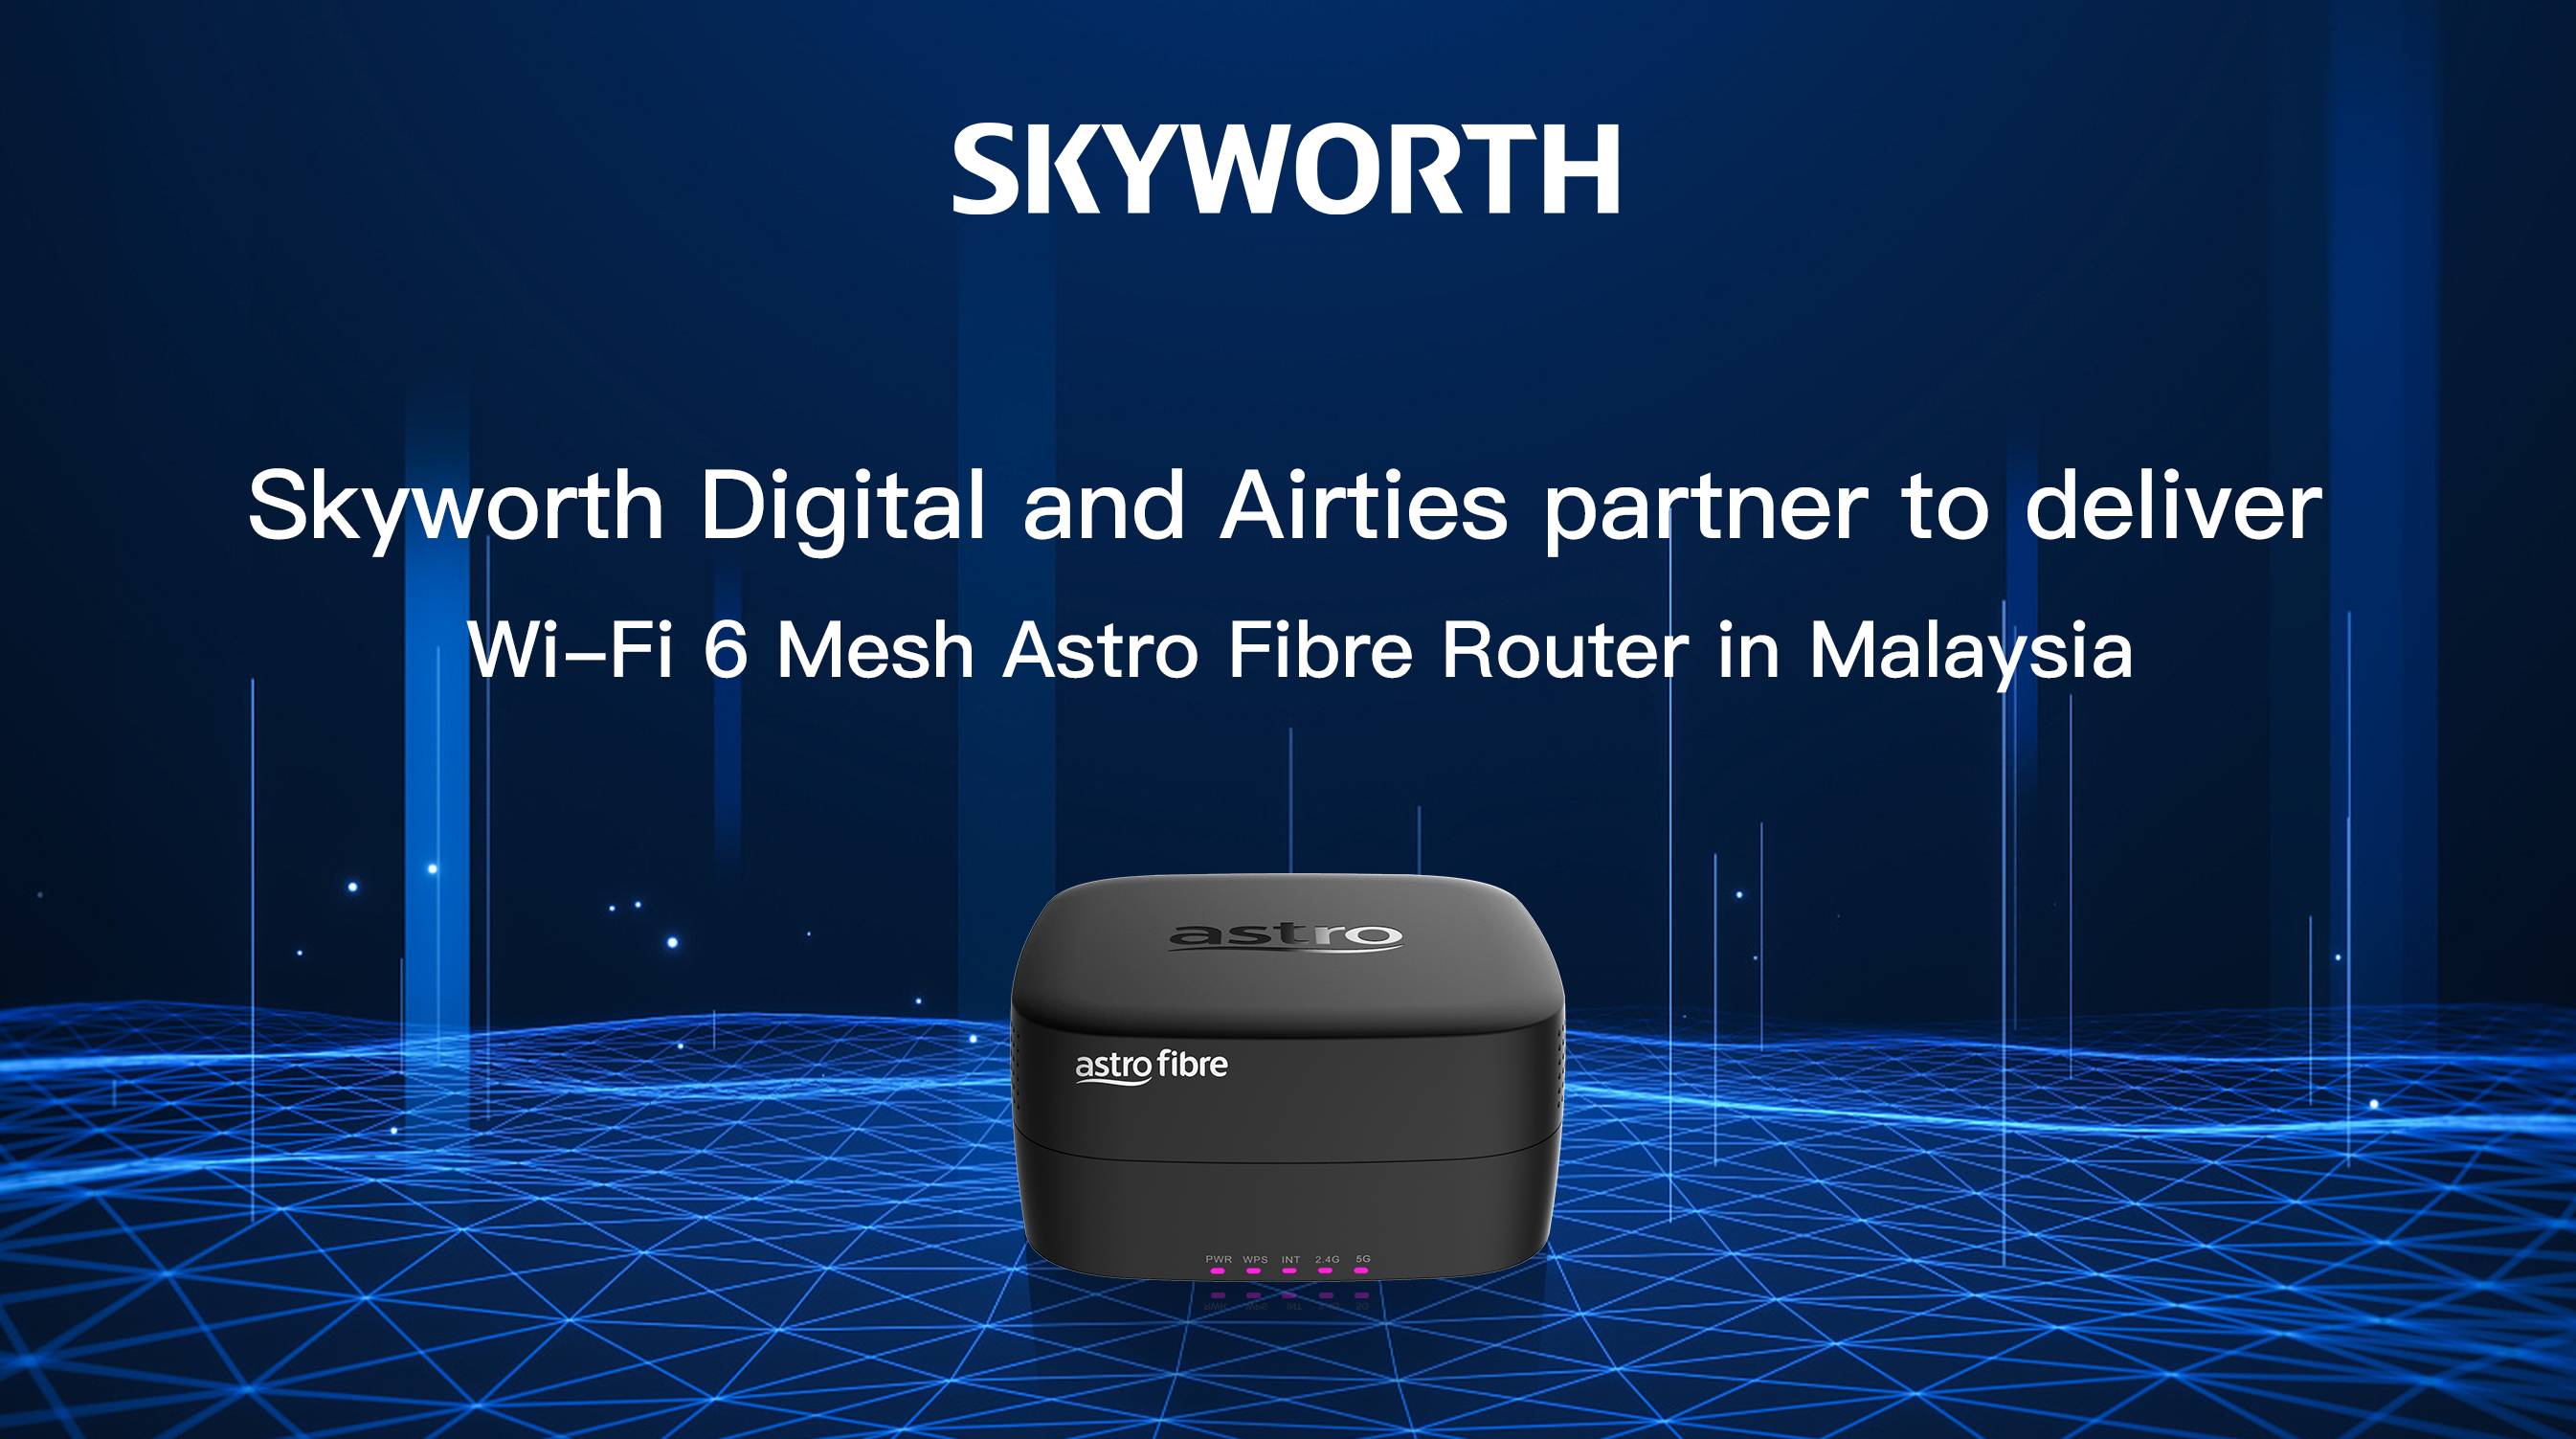 Skyworth and Airties partner to deliver the latest “Astro Fibre” Wi-Fi 6 Dual Band MESH Router for Astro in Malaysia.